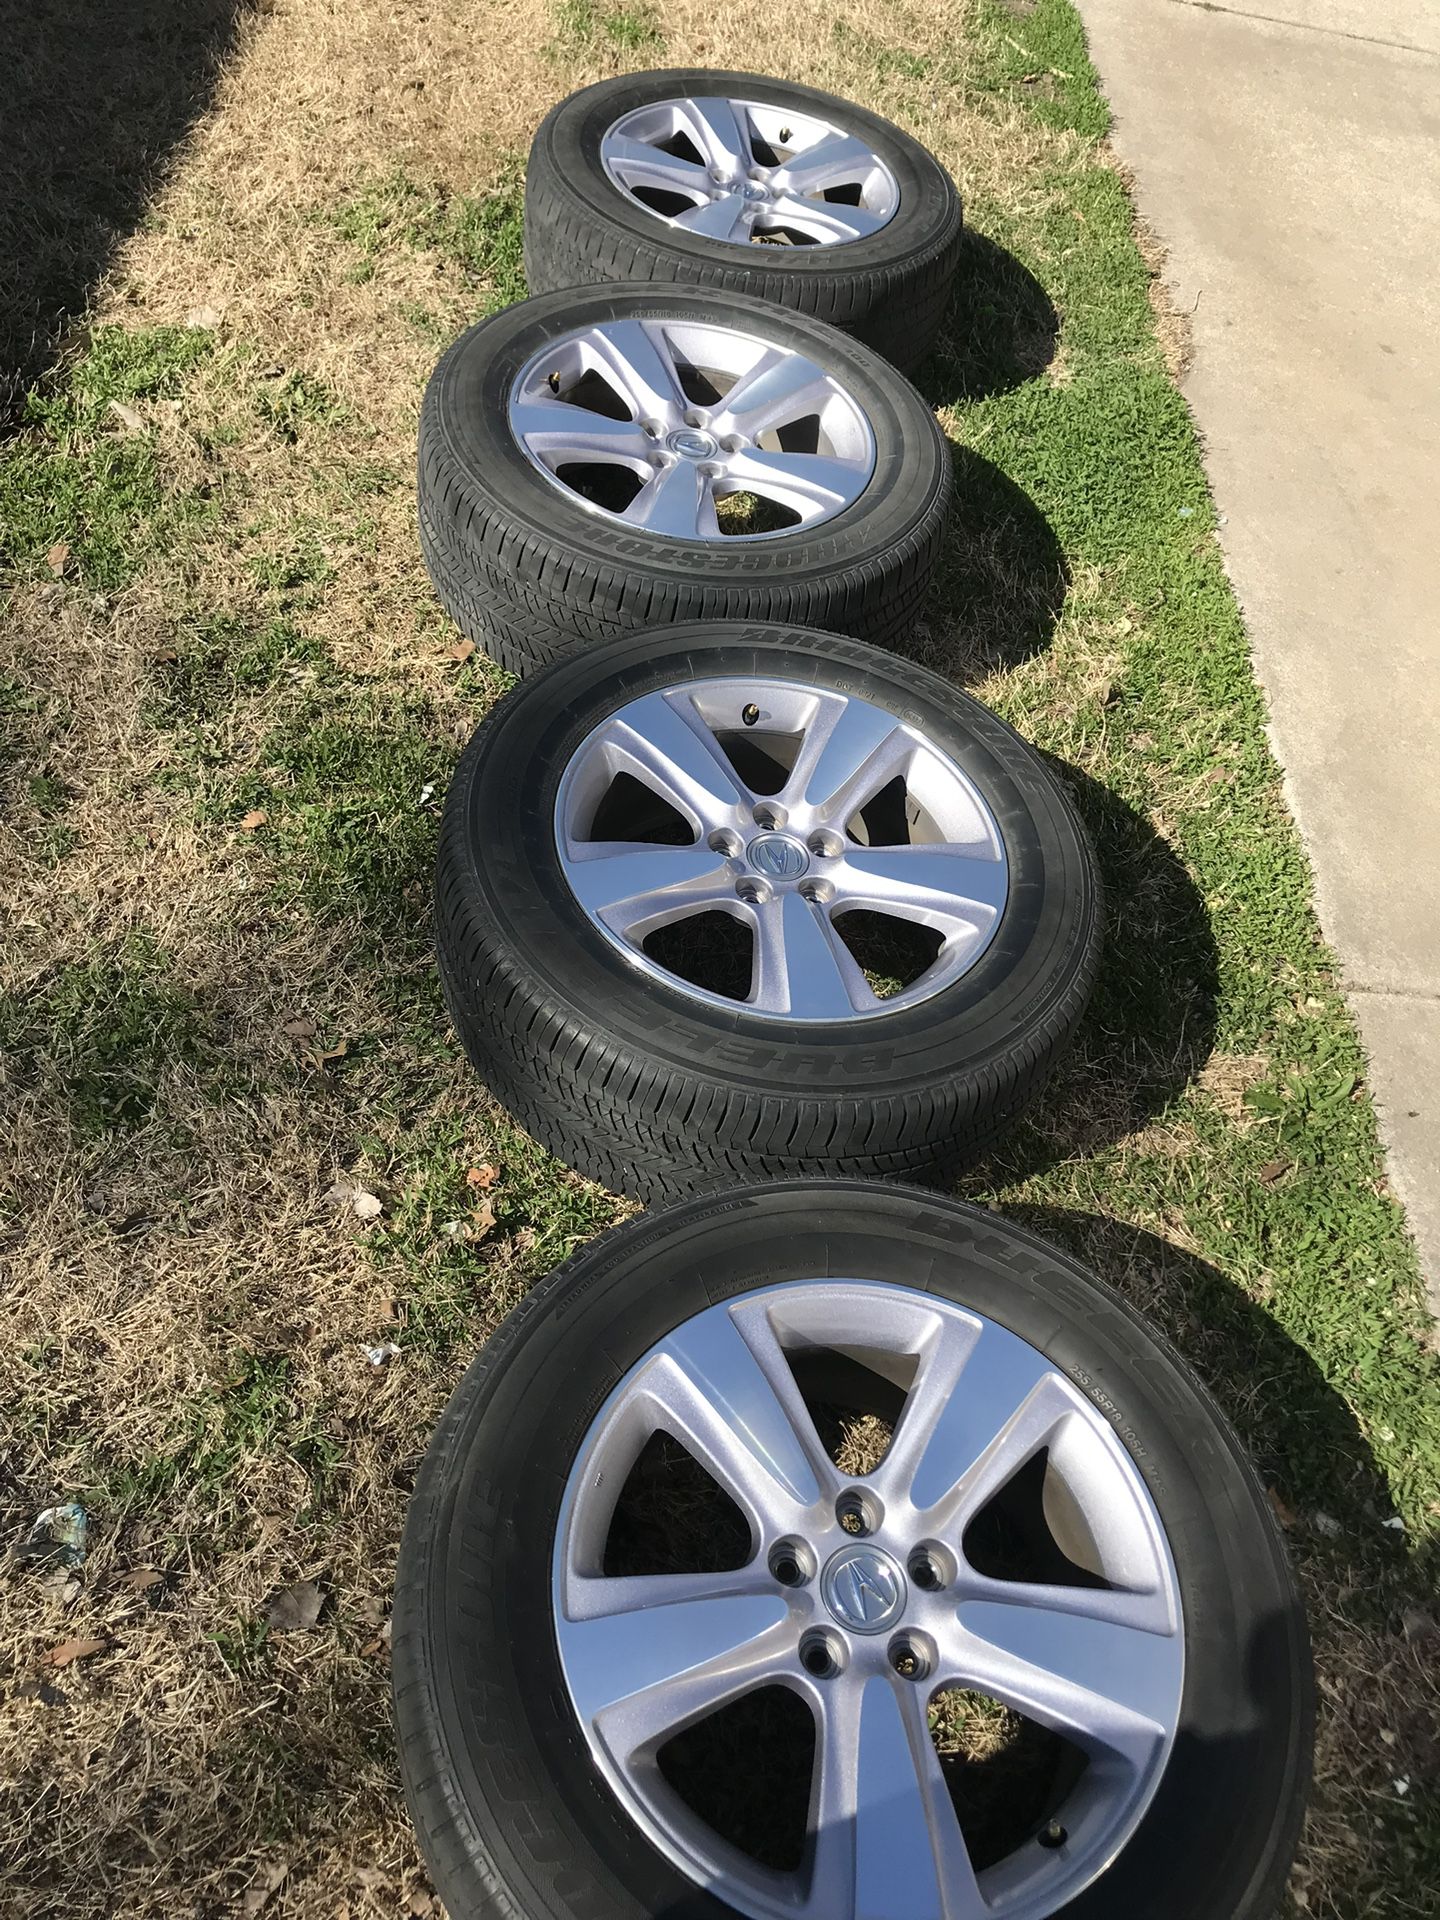 18” Acura Wheels With Tires